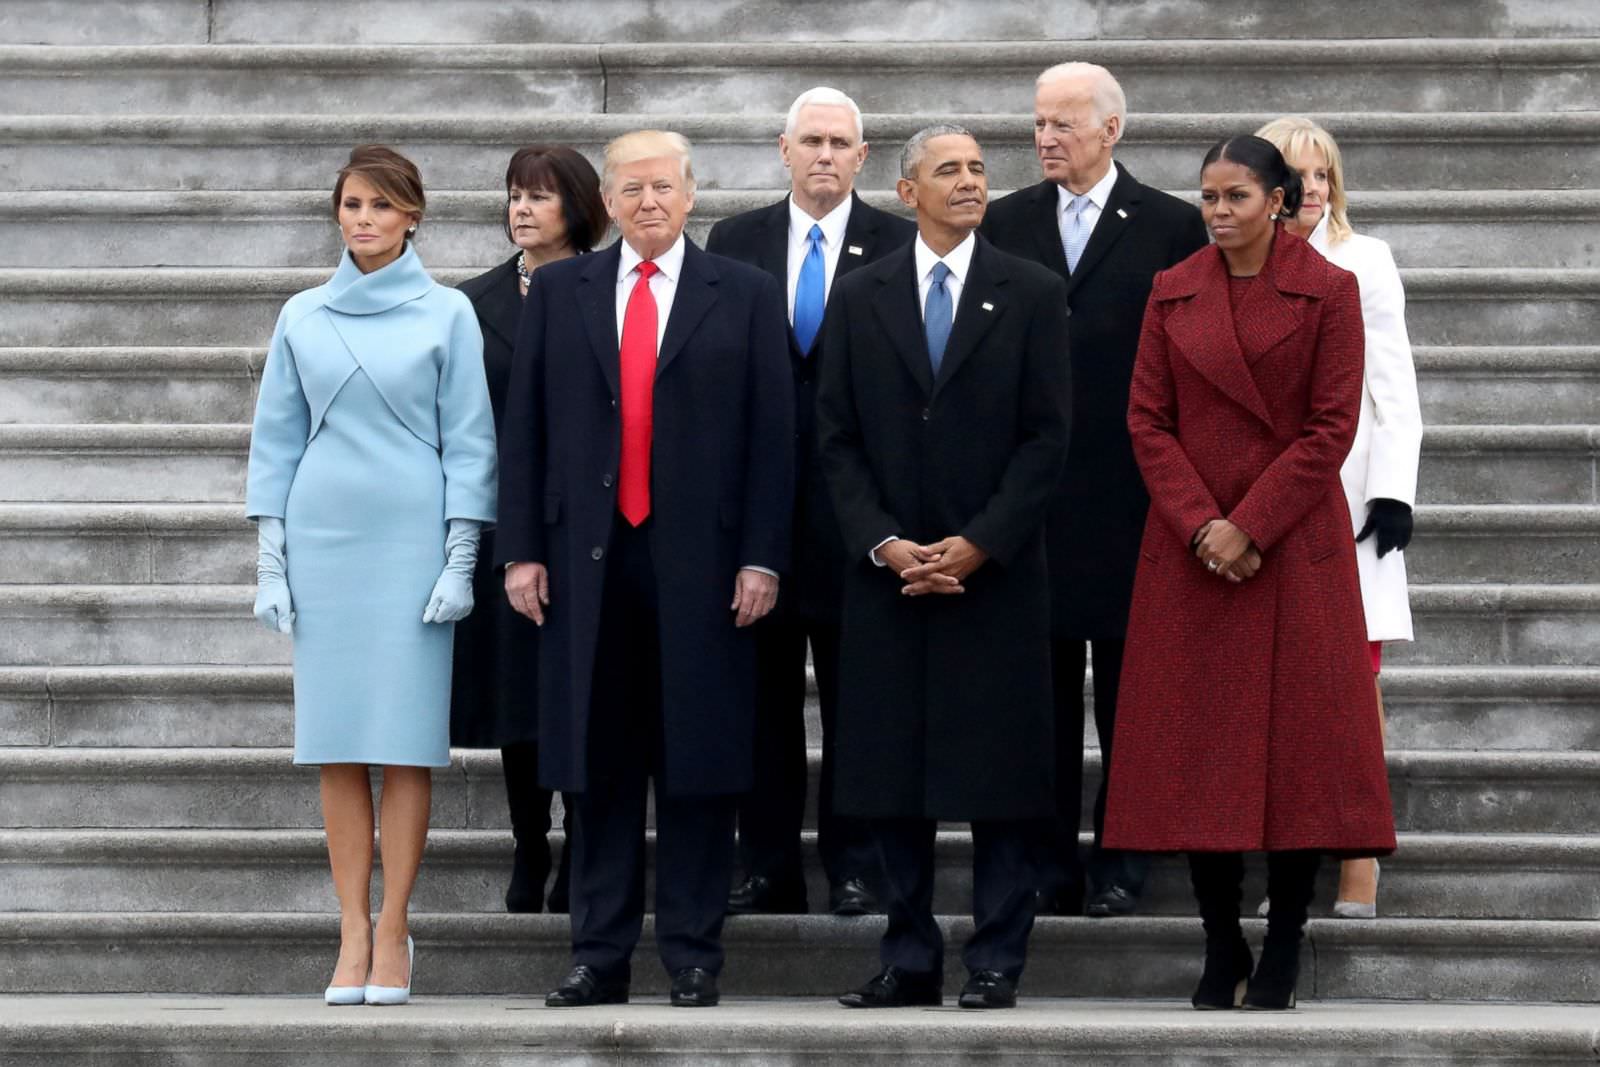 PICTURE OF OUR 6'1'' FORMER PRESIDENT NEXT TO OUR 6'3'' CURRENT PRESIDENT